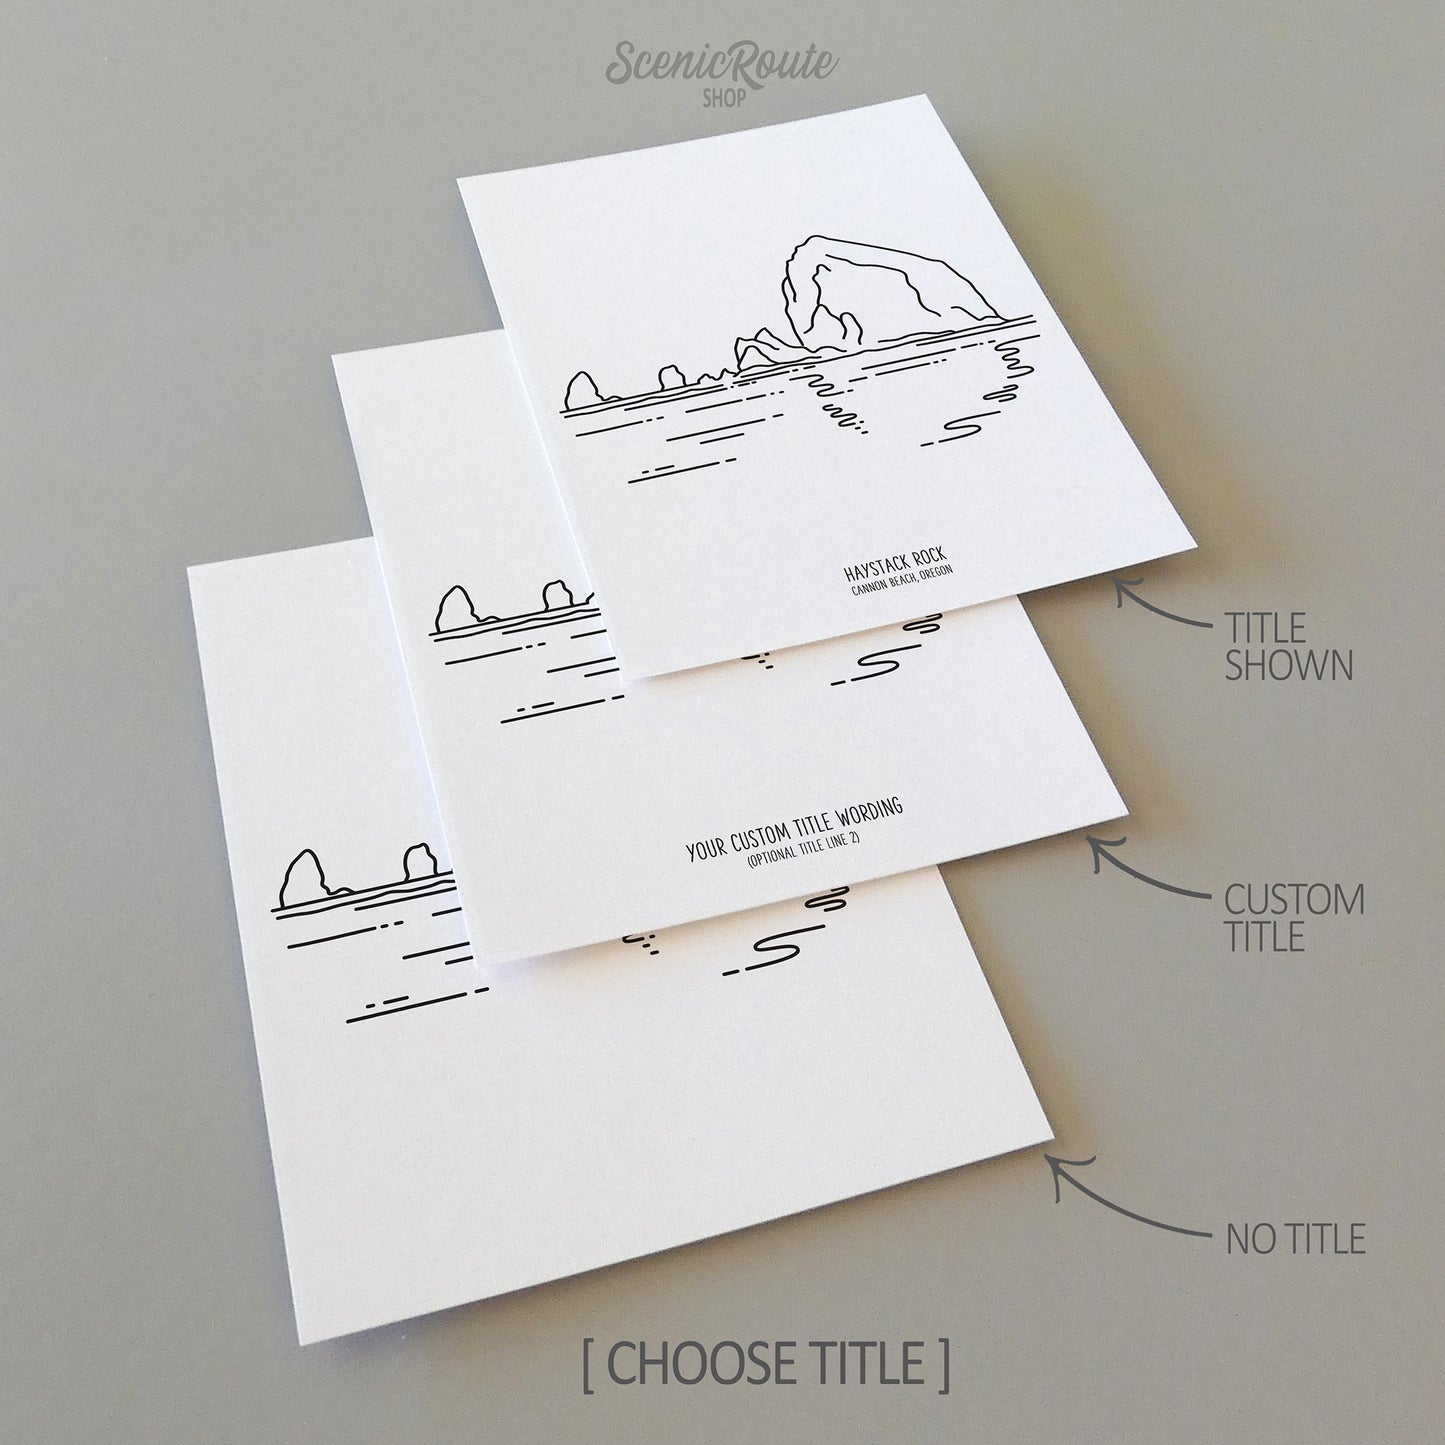 Three line art drawings of Haystack Rock in Oregon on white linen paper with a gray background.  The pieces are shown with title options that can be chosen and personalized.